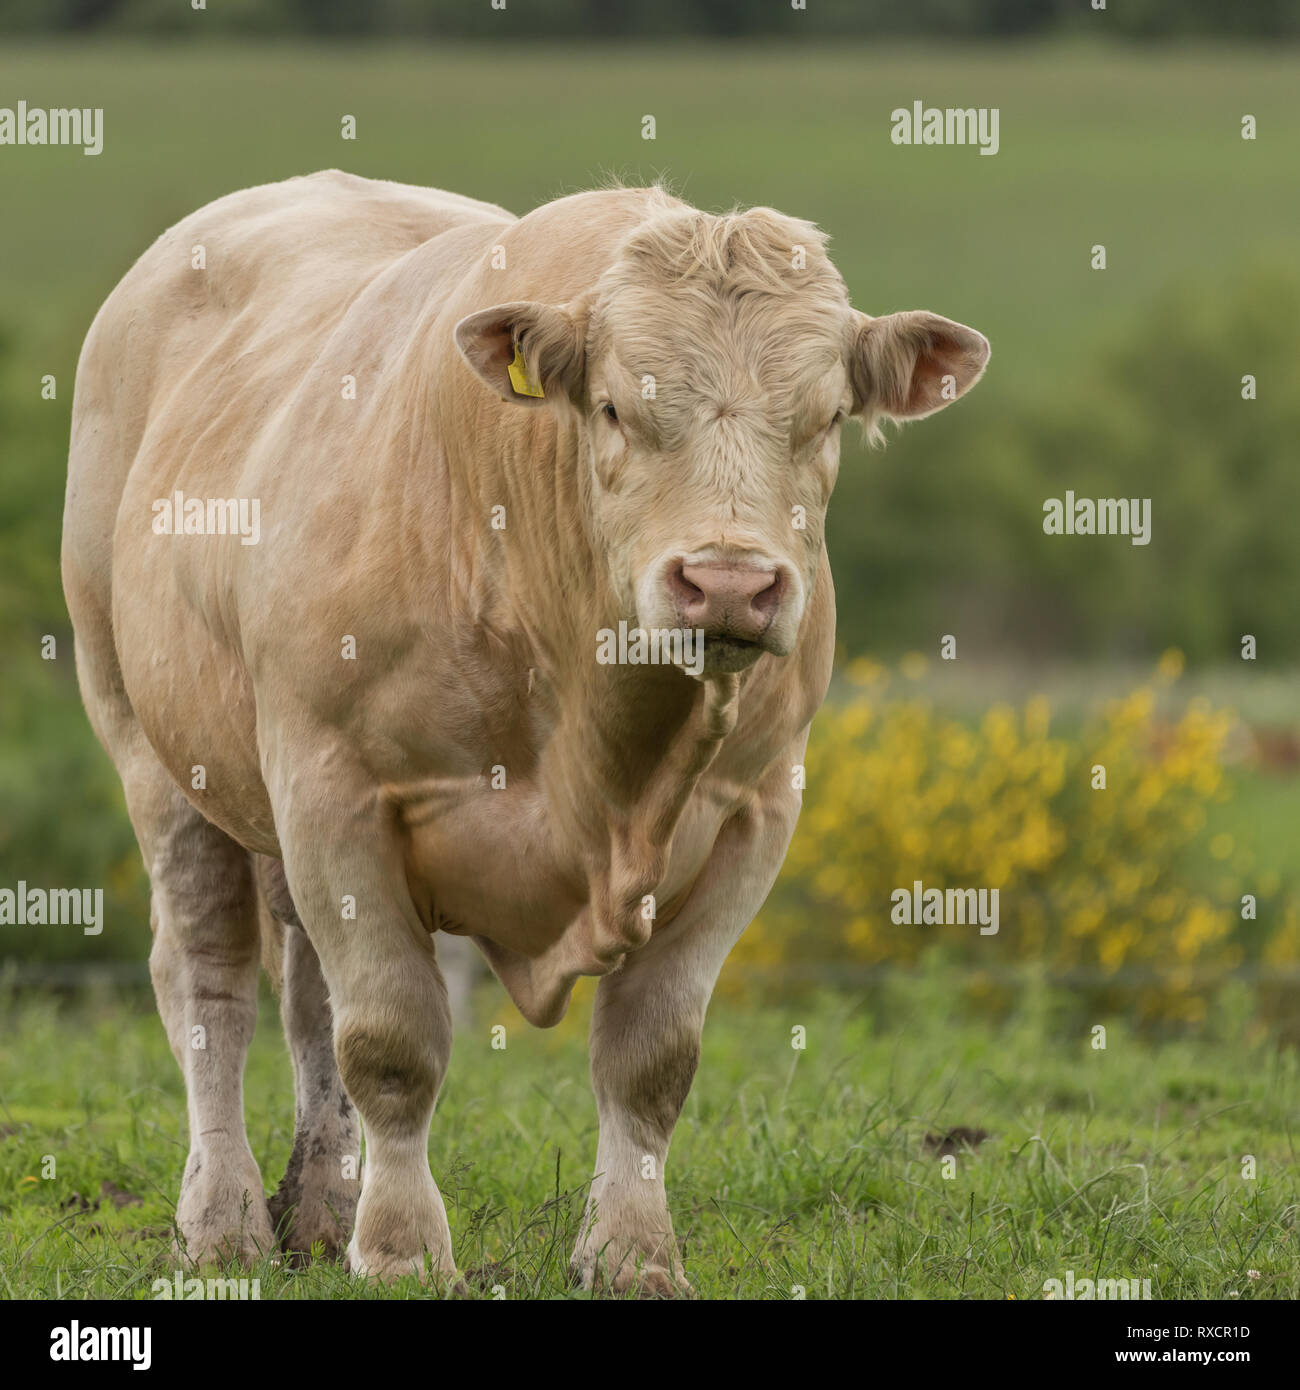 Large pedigree Charolais bull with cream coloured coat standing in meadow Stock Photo